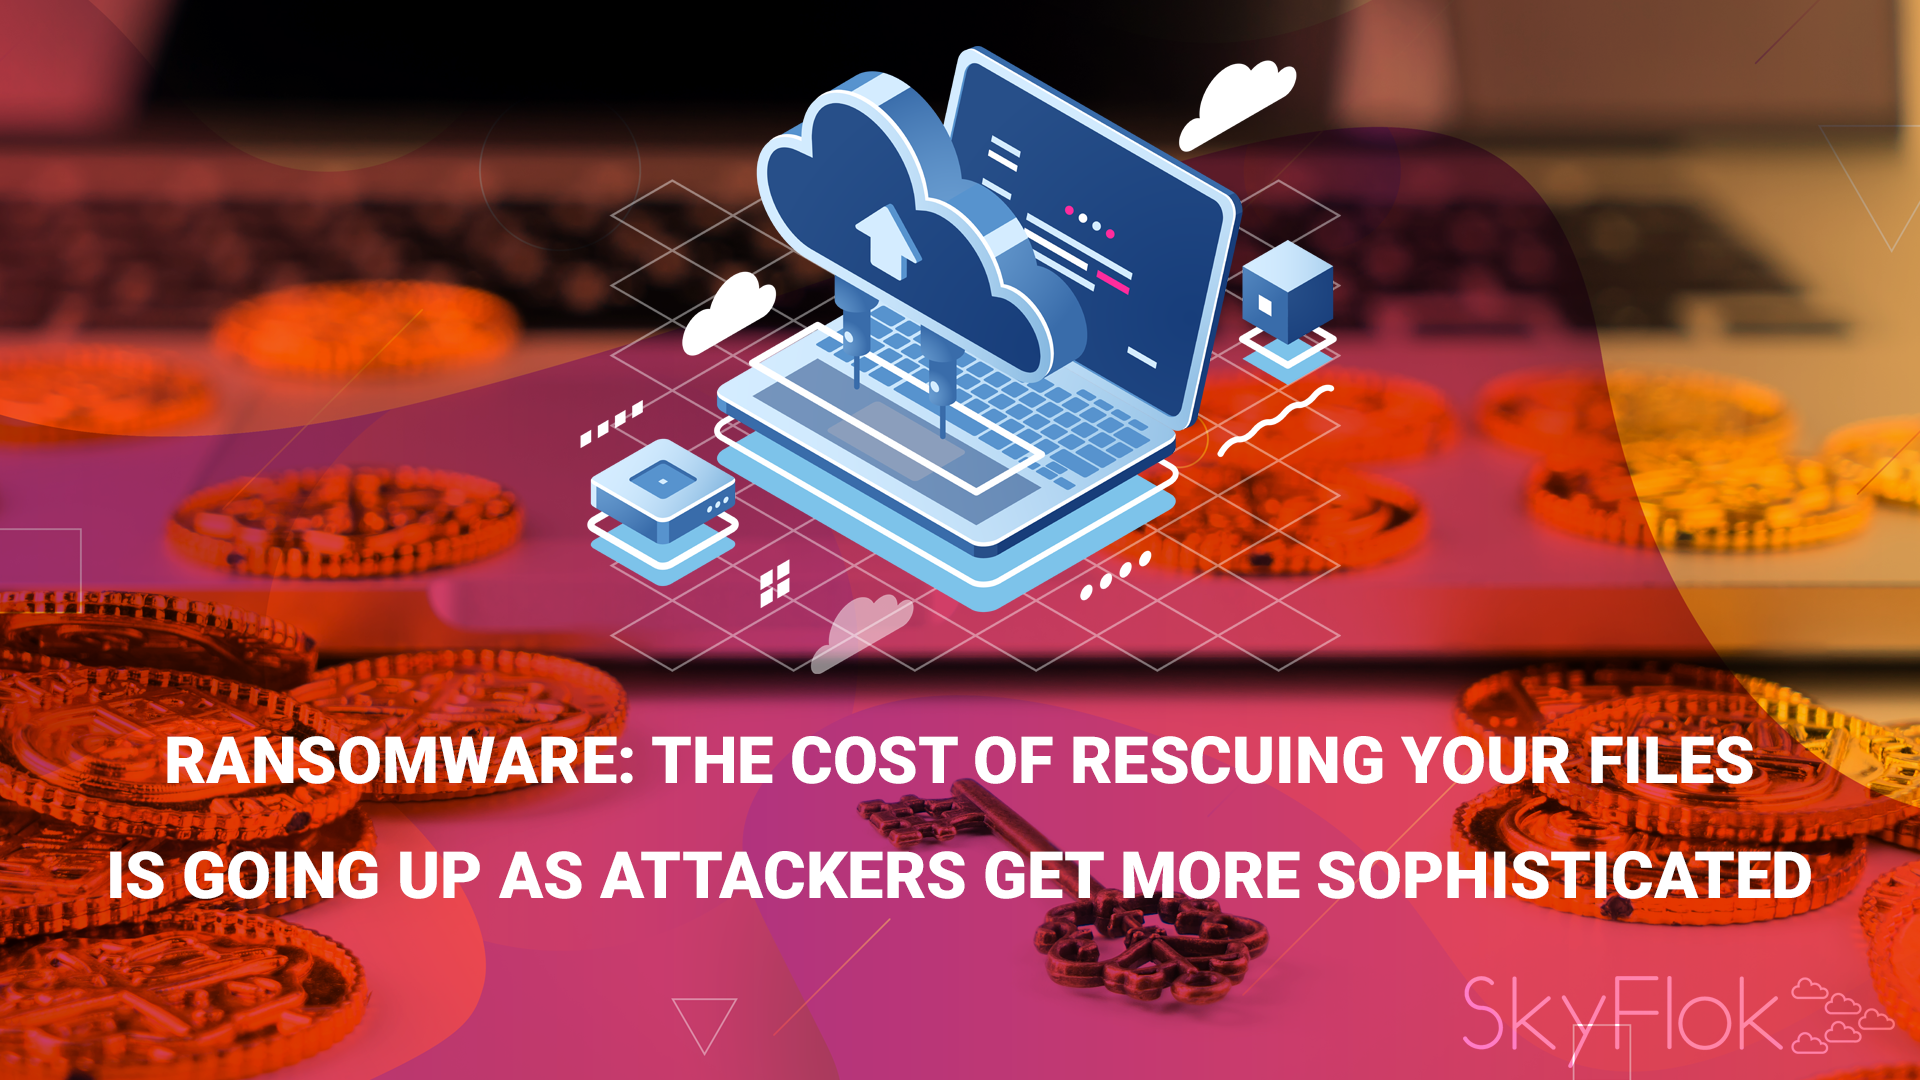 You are currently viewing Ransomware: The cost of rescuing your files is going up as attackers get more sophisticated